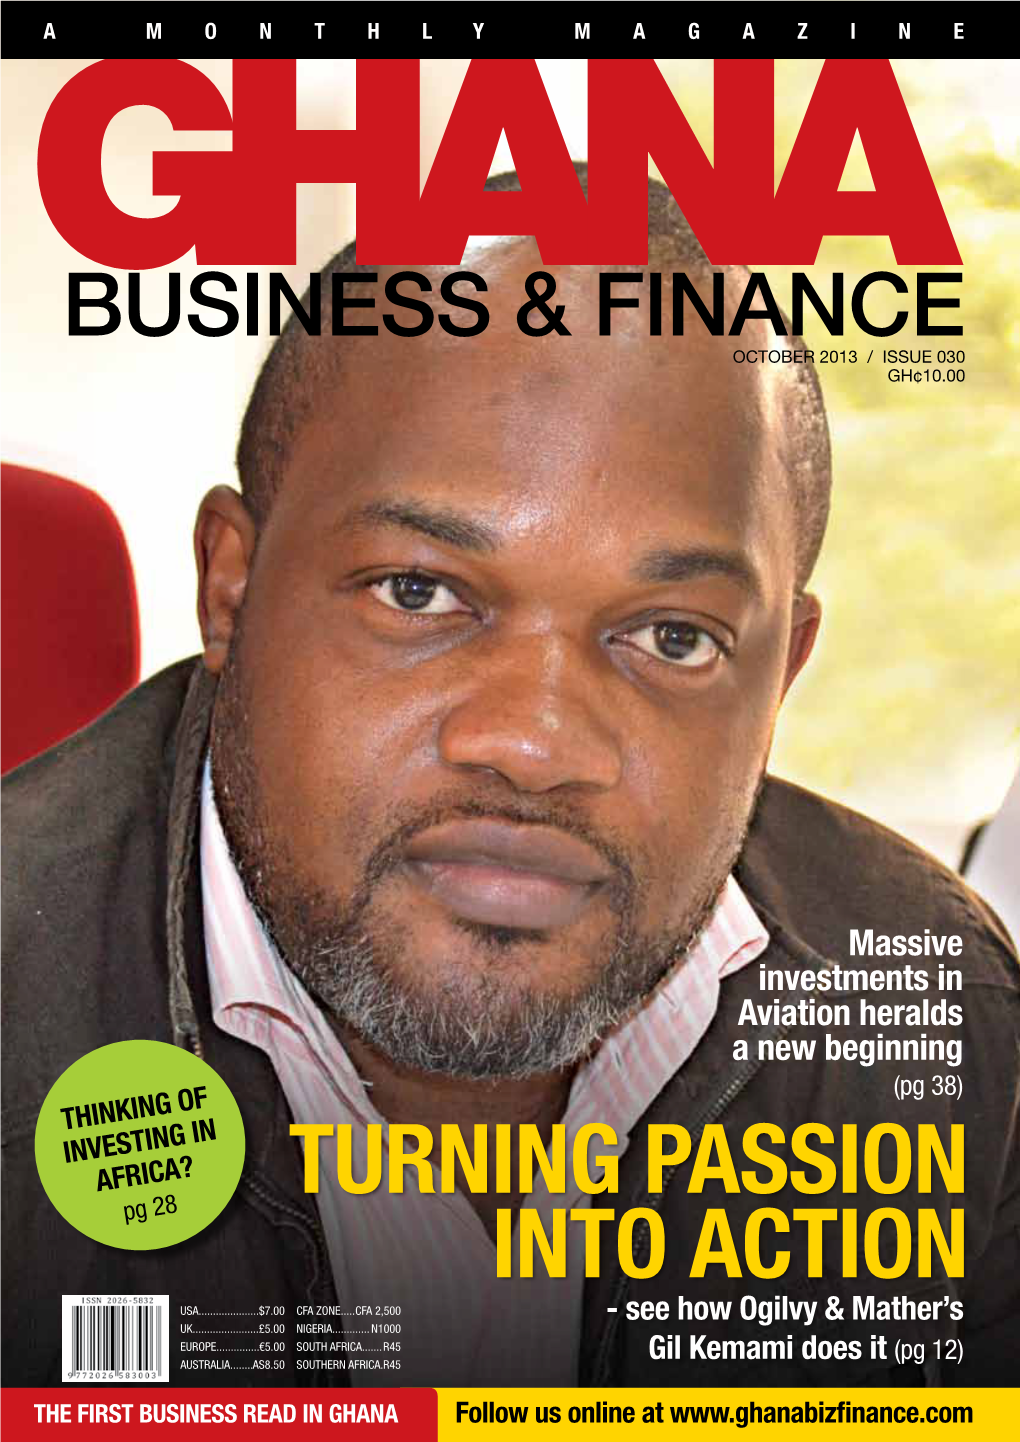 Massive Investments in Aviation Heralds a New Beginning (Pg 38) THINKING of INVESTING in AFRICA? Pg 28